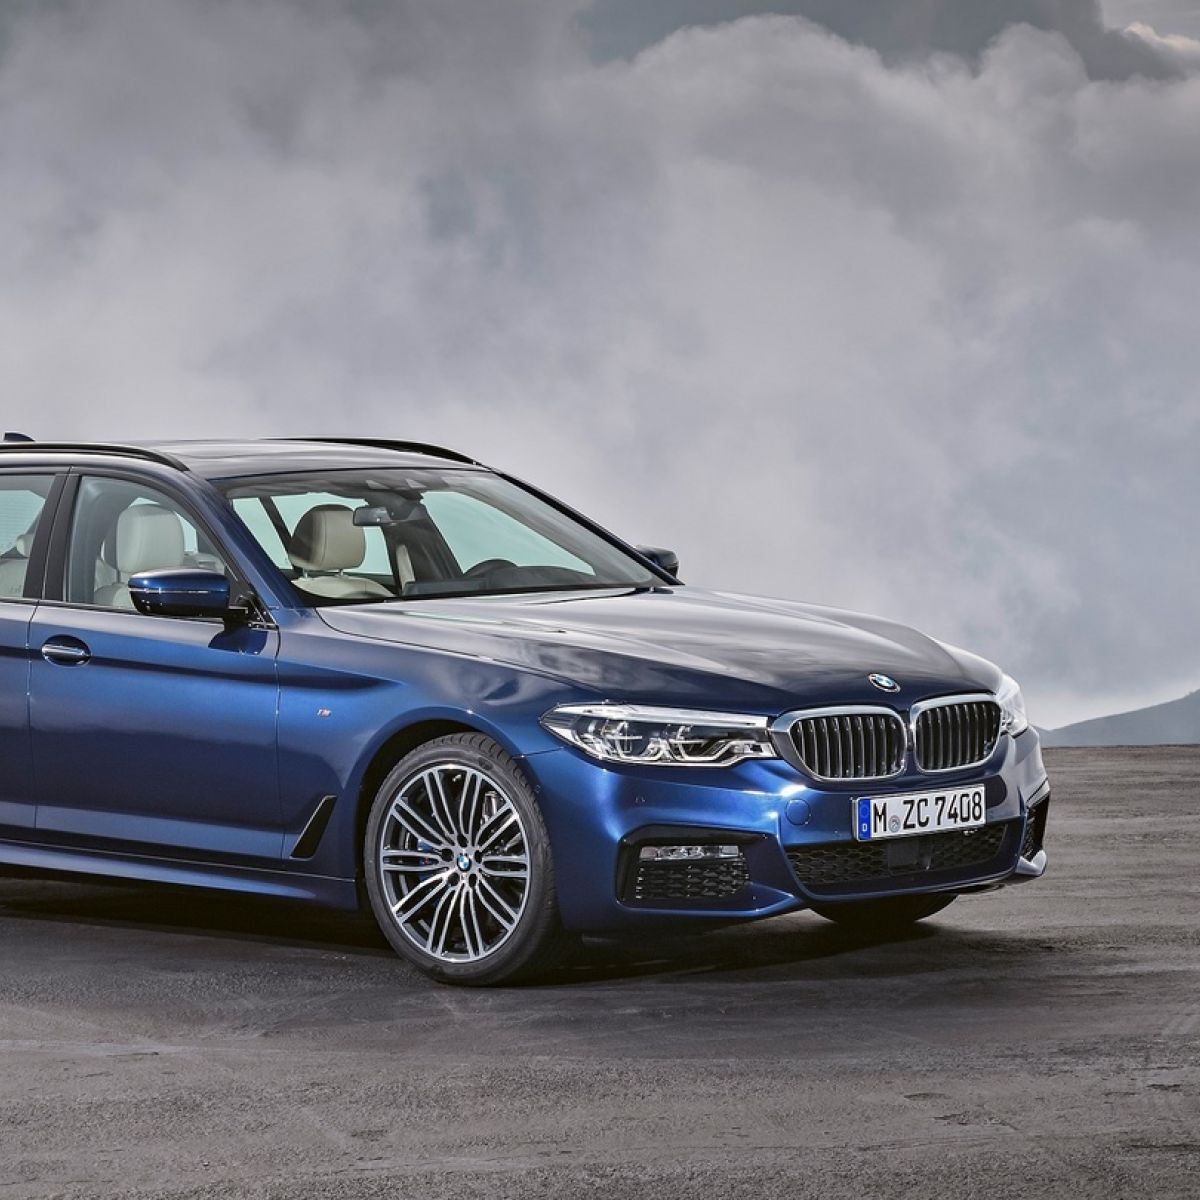 BMW's 5 Touring may be more practical than a Volvo